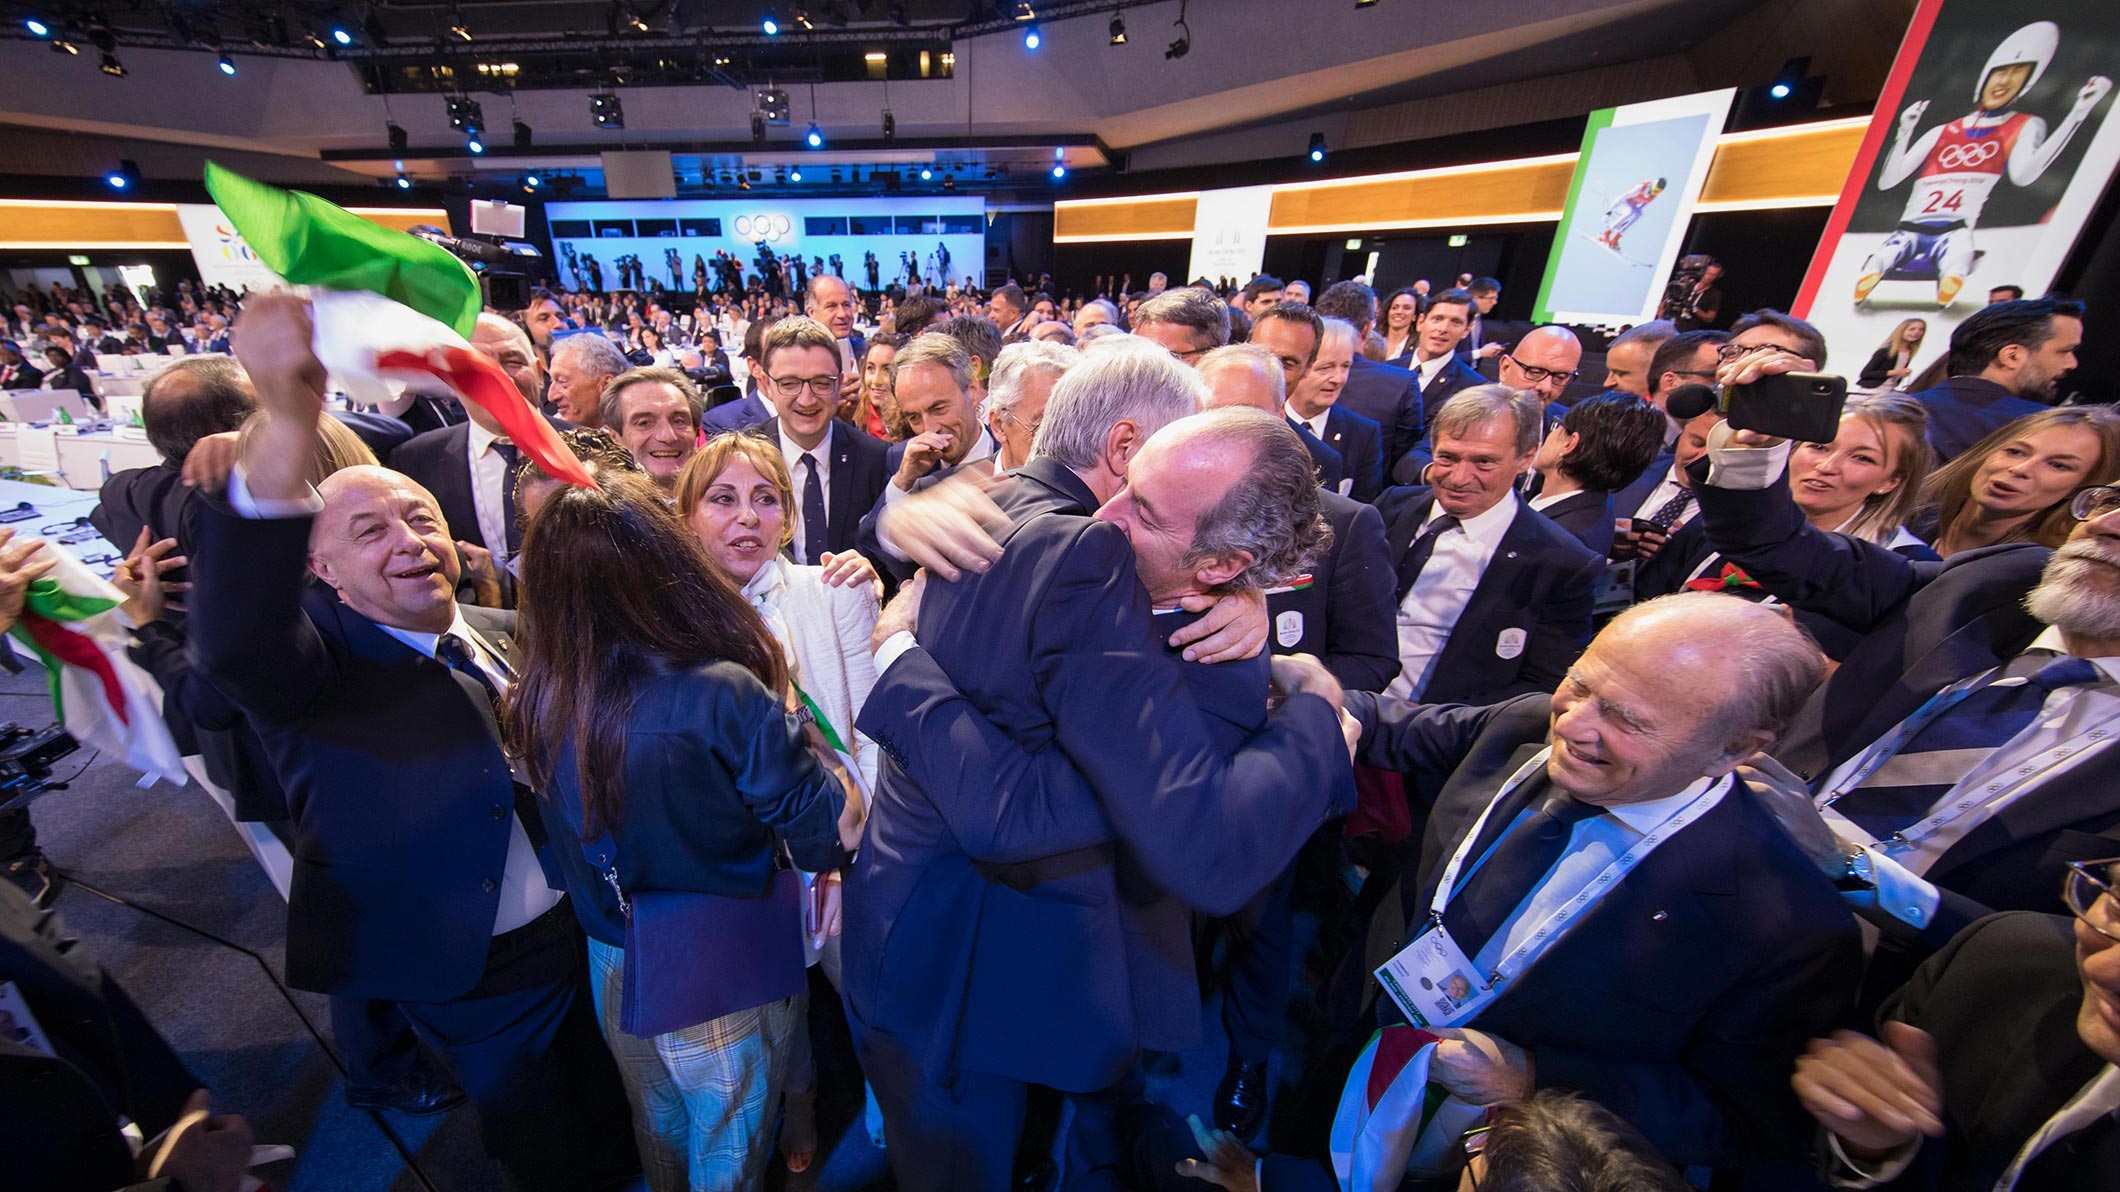 134th IOC Session, Lausanne, 2019 - Announcement of the host city for the Winter Olympic Games. Milano-Cortina elected. Joy of the Milano bid committee.